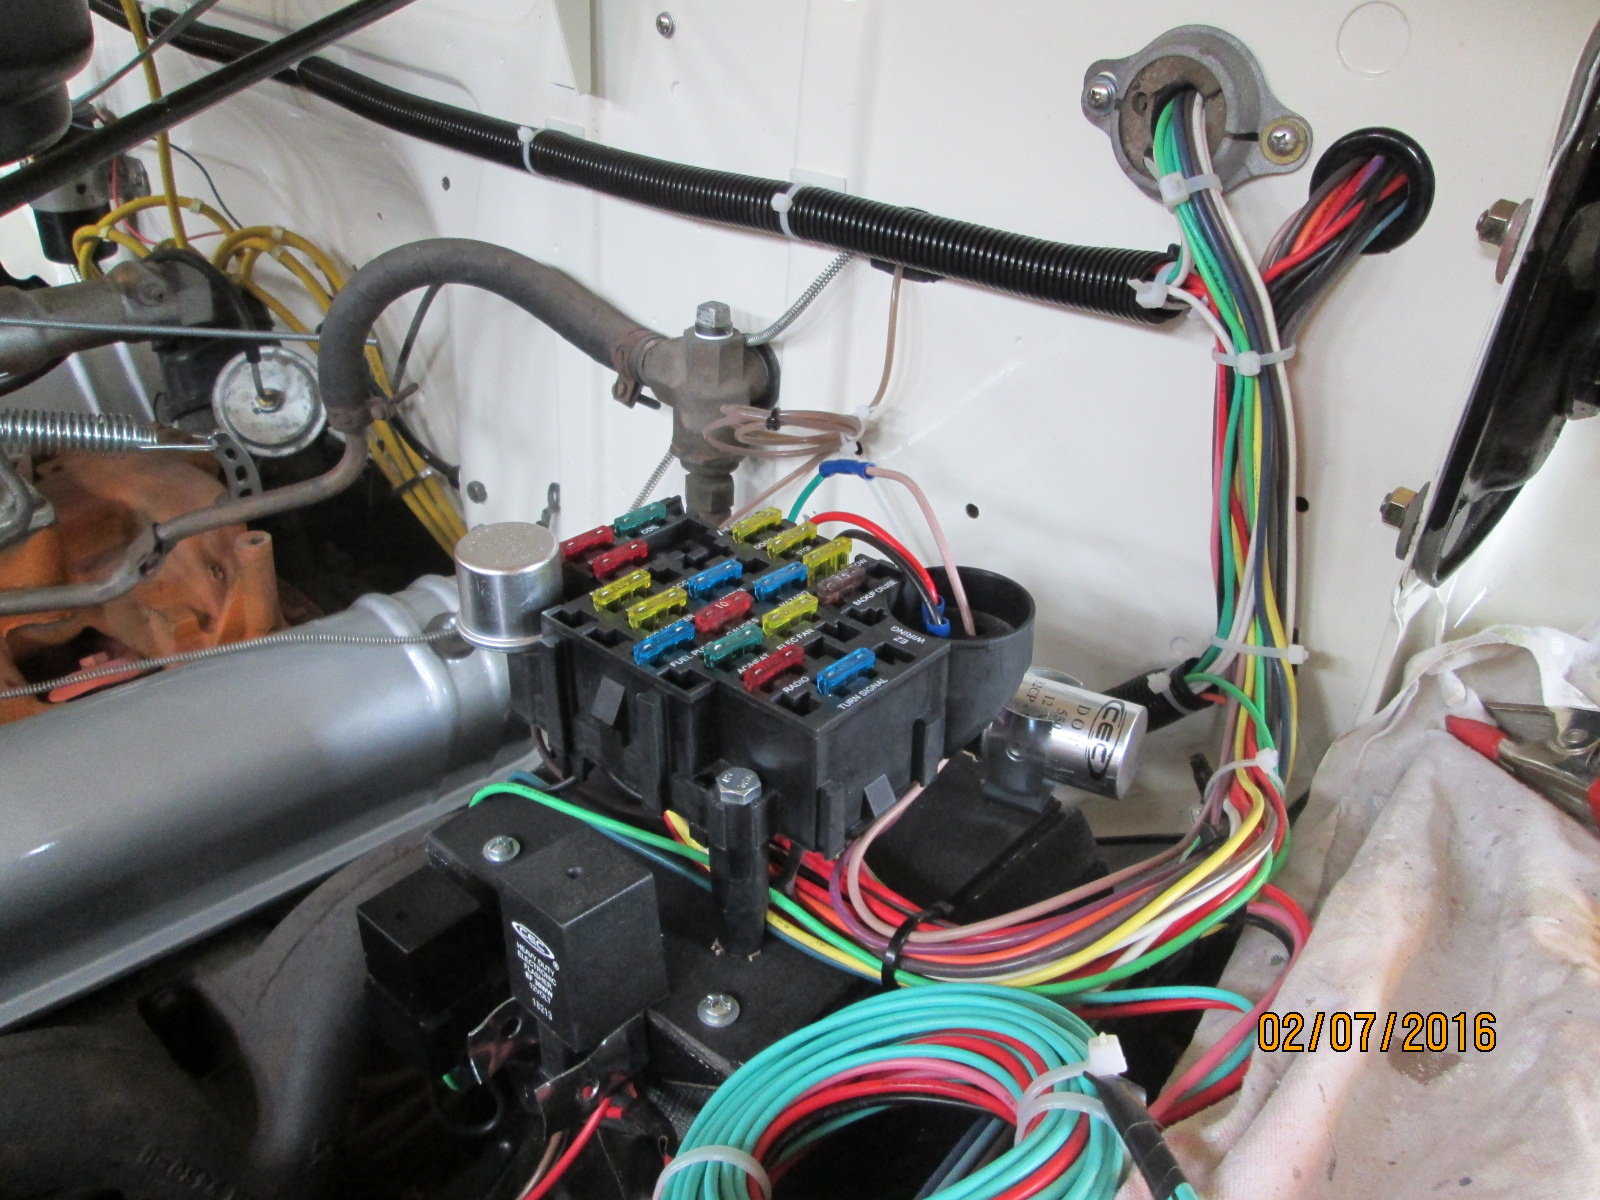 fuse box location - Ford Truck Enthusiasts Forums